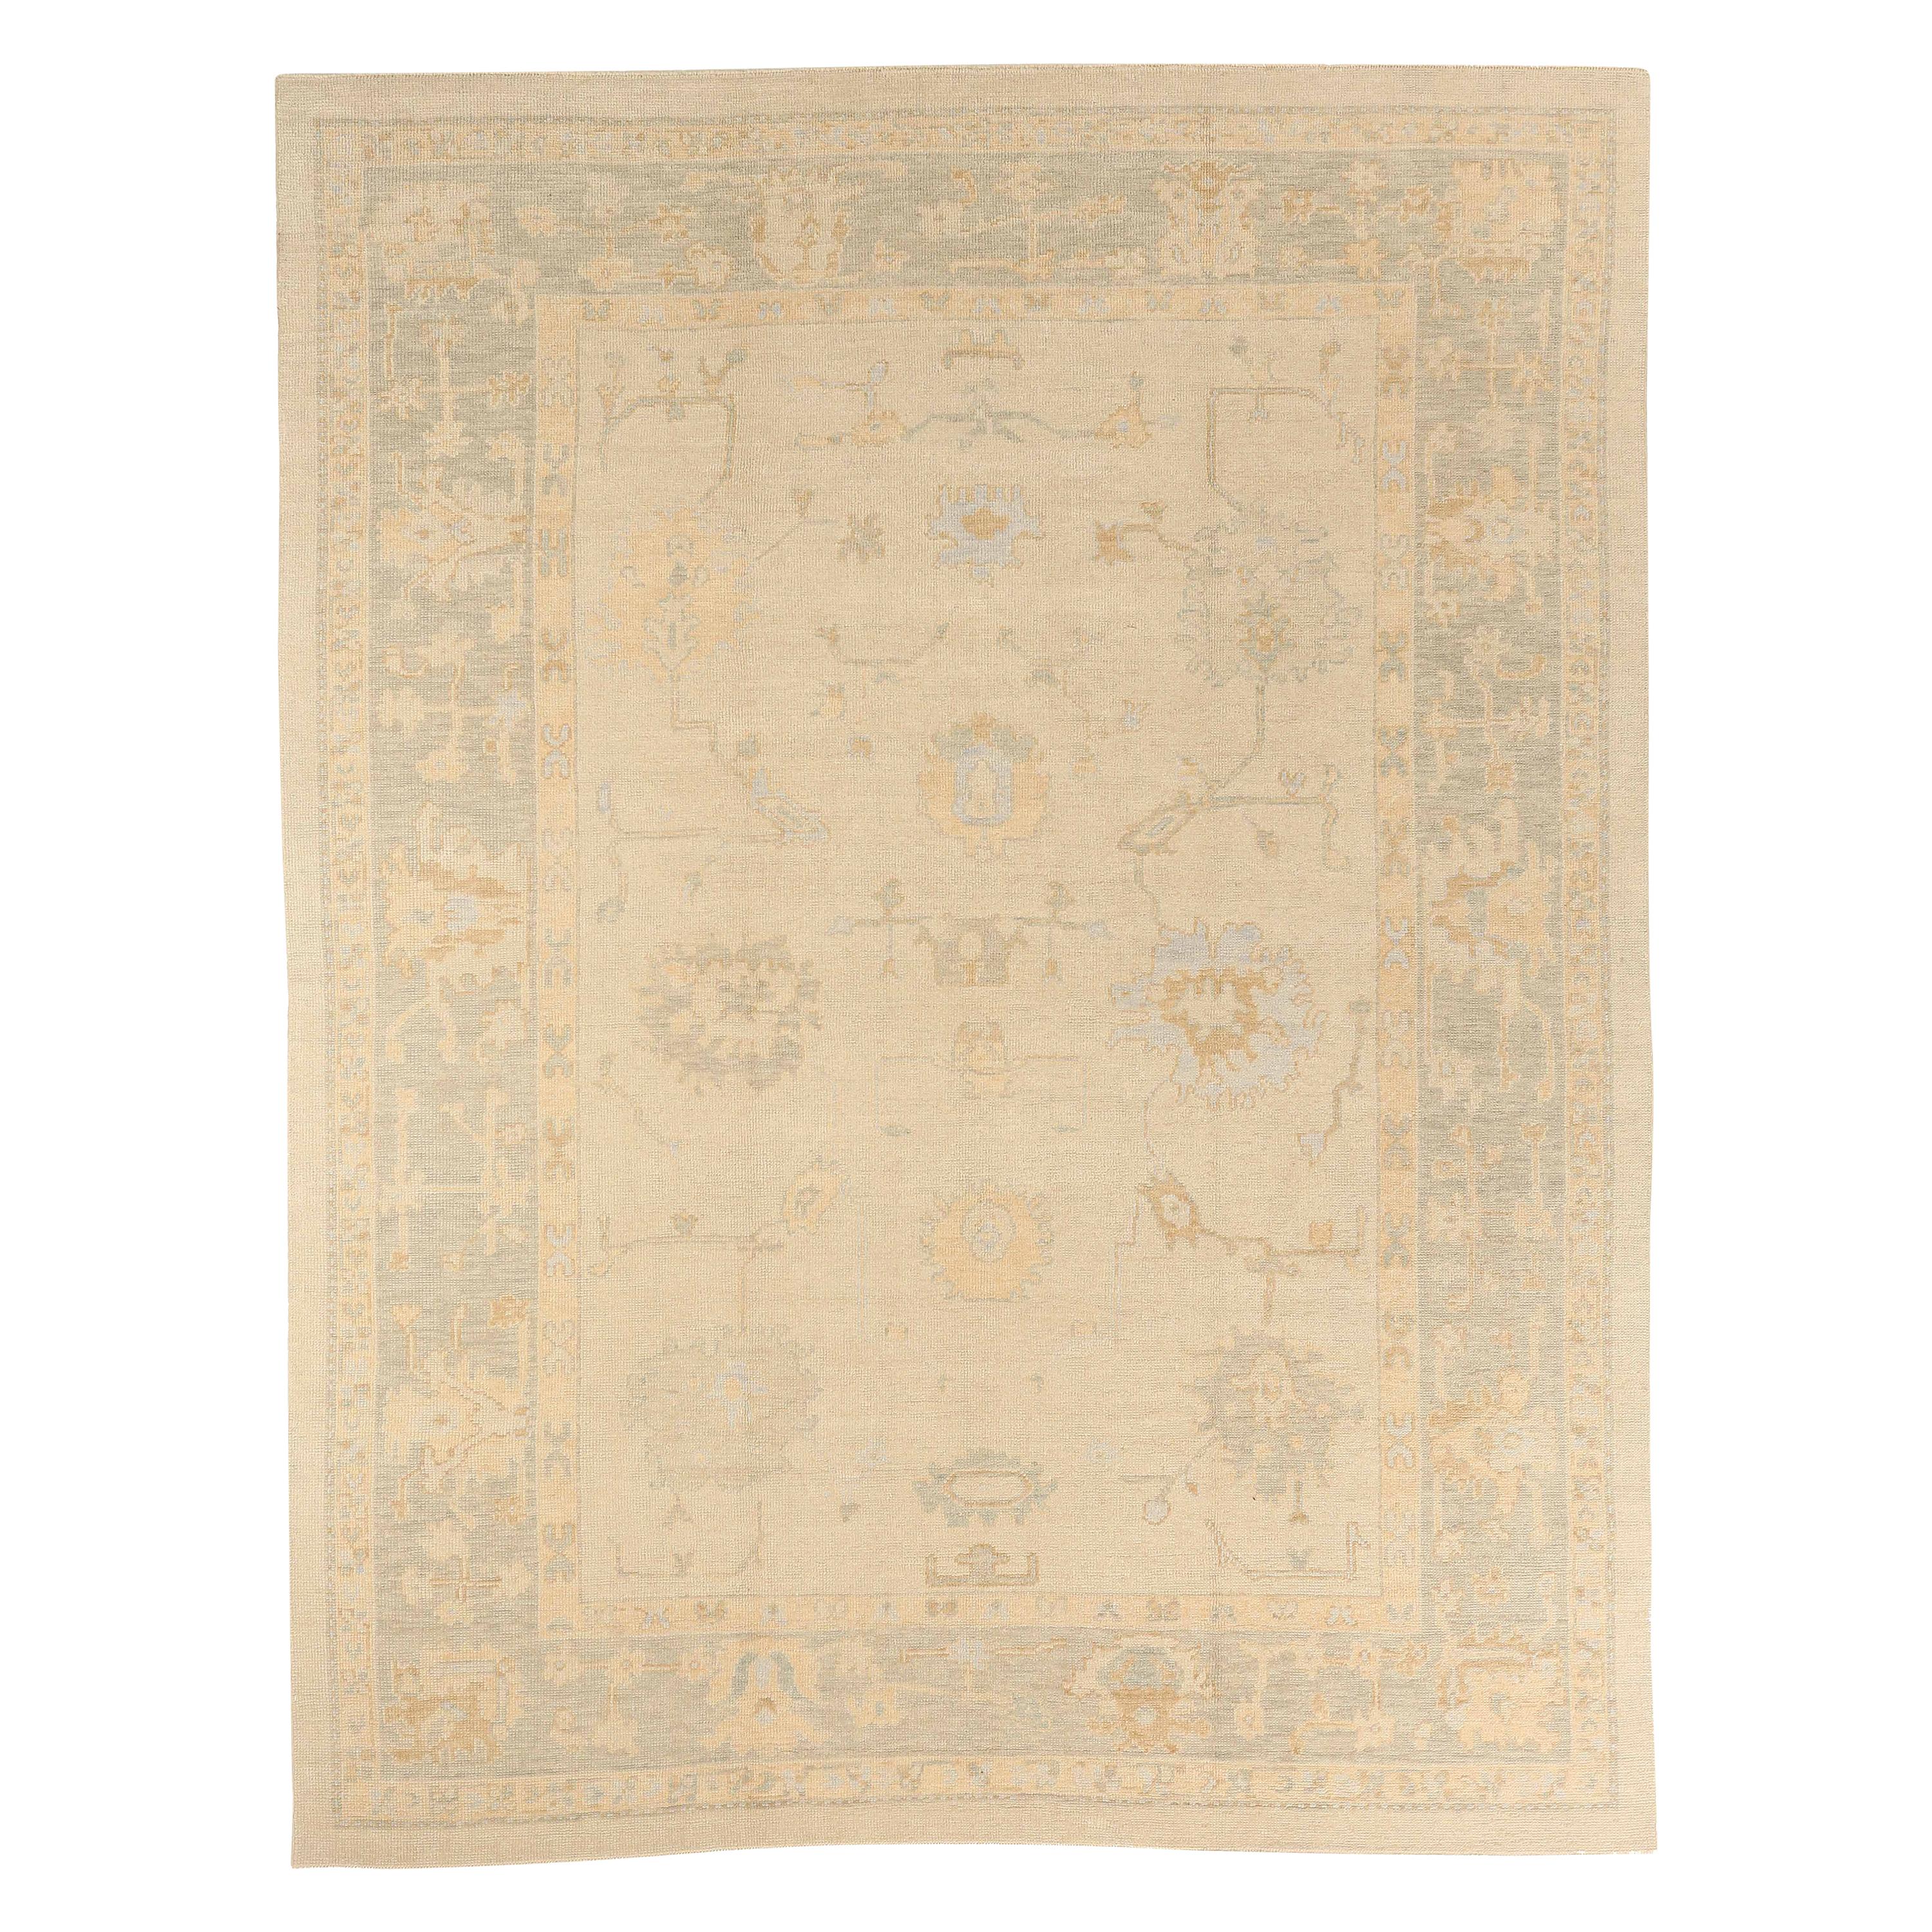 Contemporary Turkish Oushak Rug with Gray and Brown Floral Details